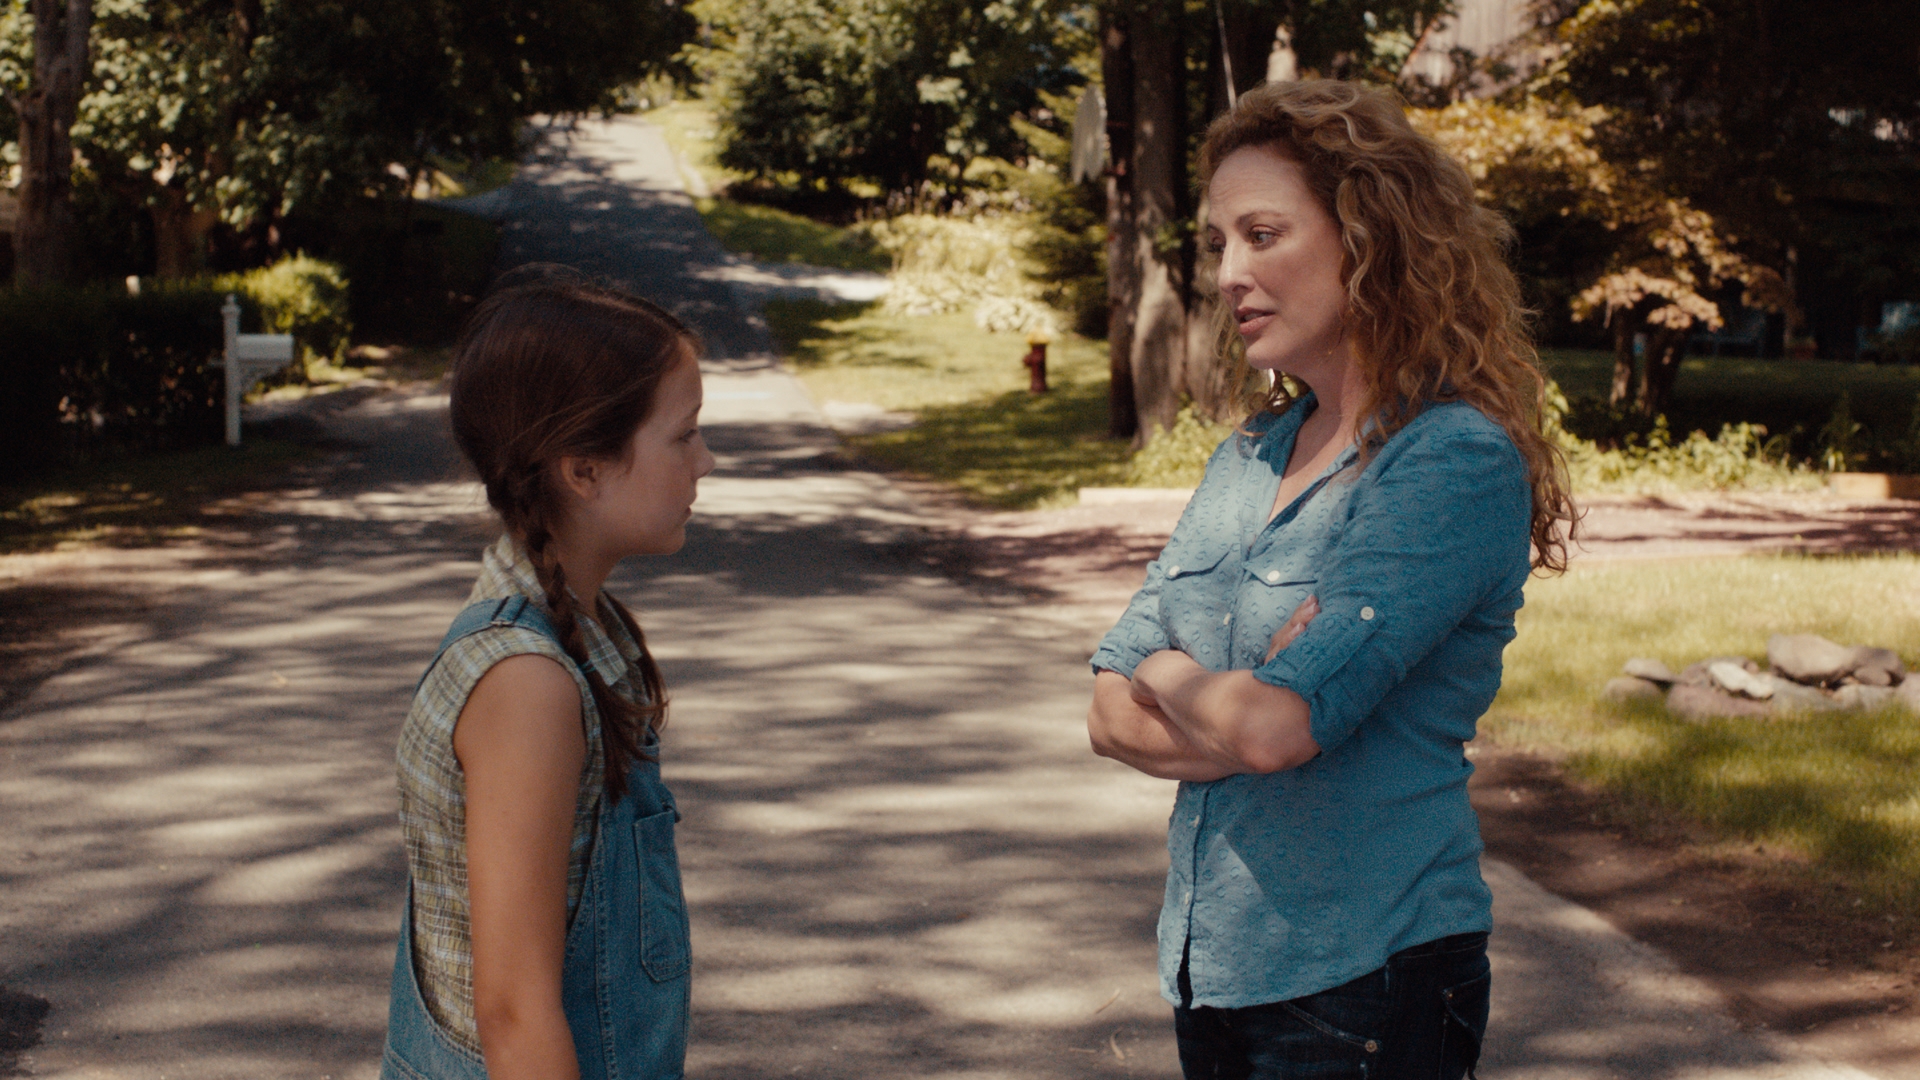 Virginia Madsen and Emma Fuhrmann in THE MAGIC OF BELLE ISLE